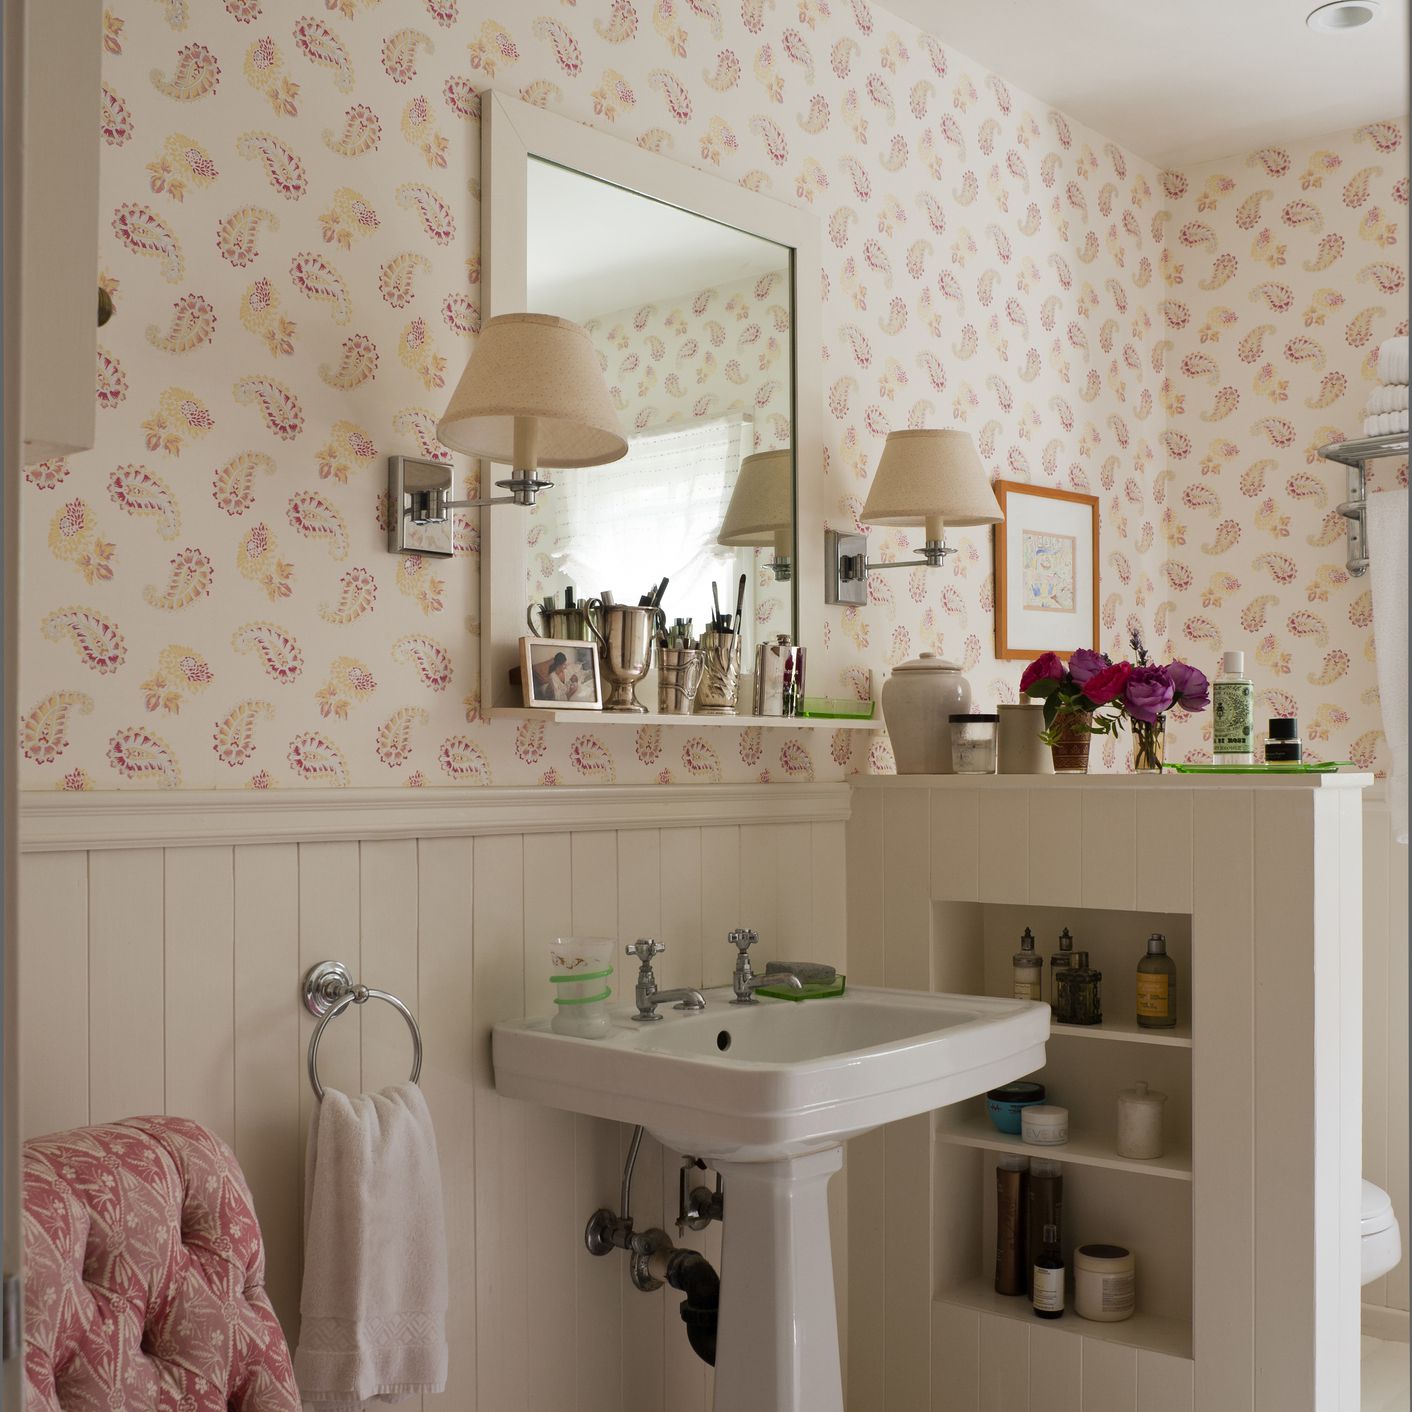 6 Different Types of Bathroom Styles for Your Inspiration - Go Get Yourself